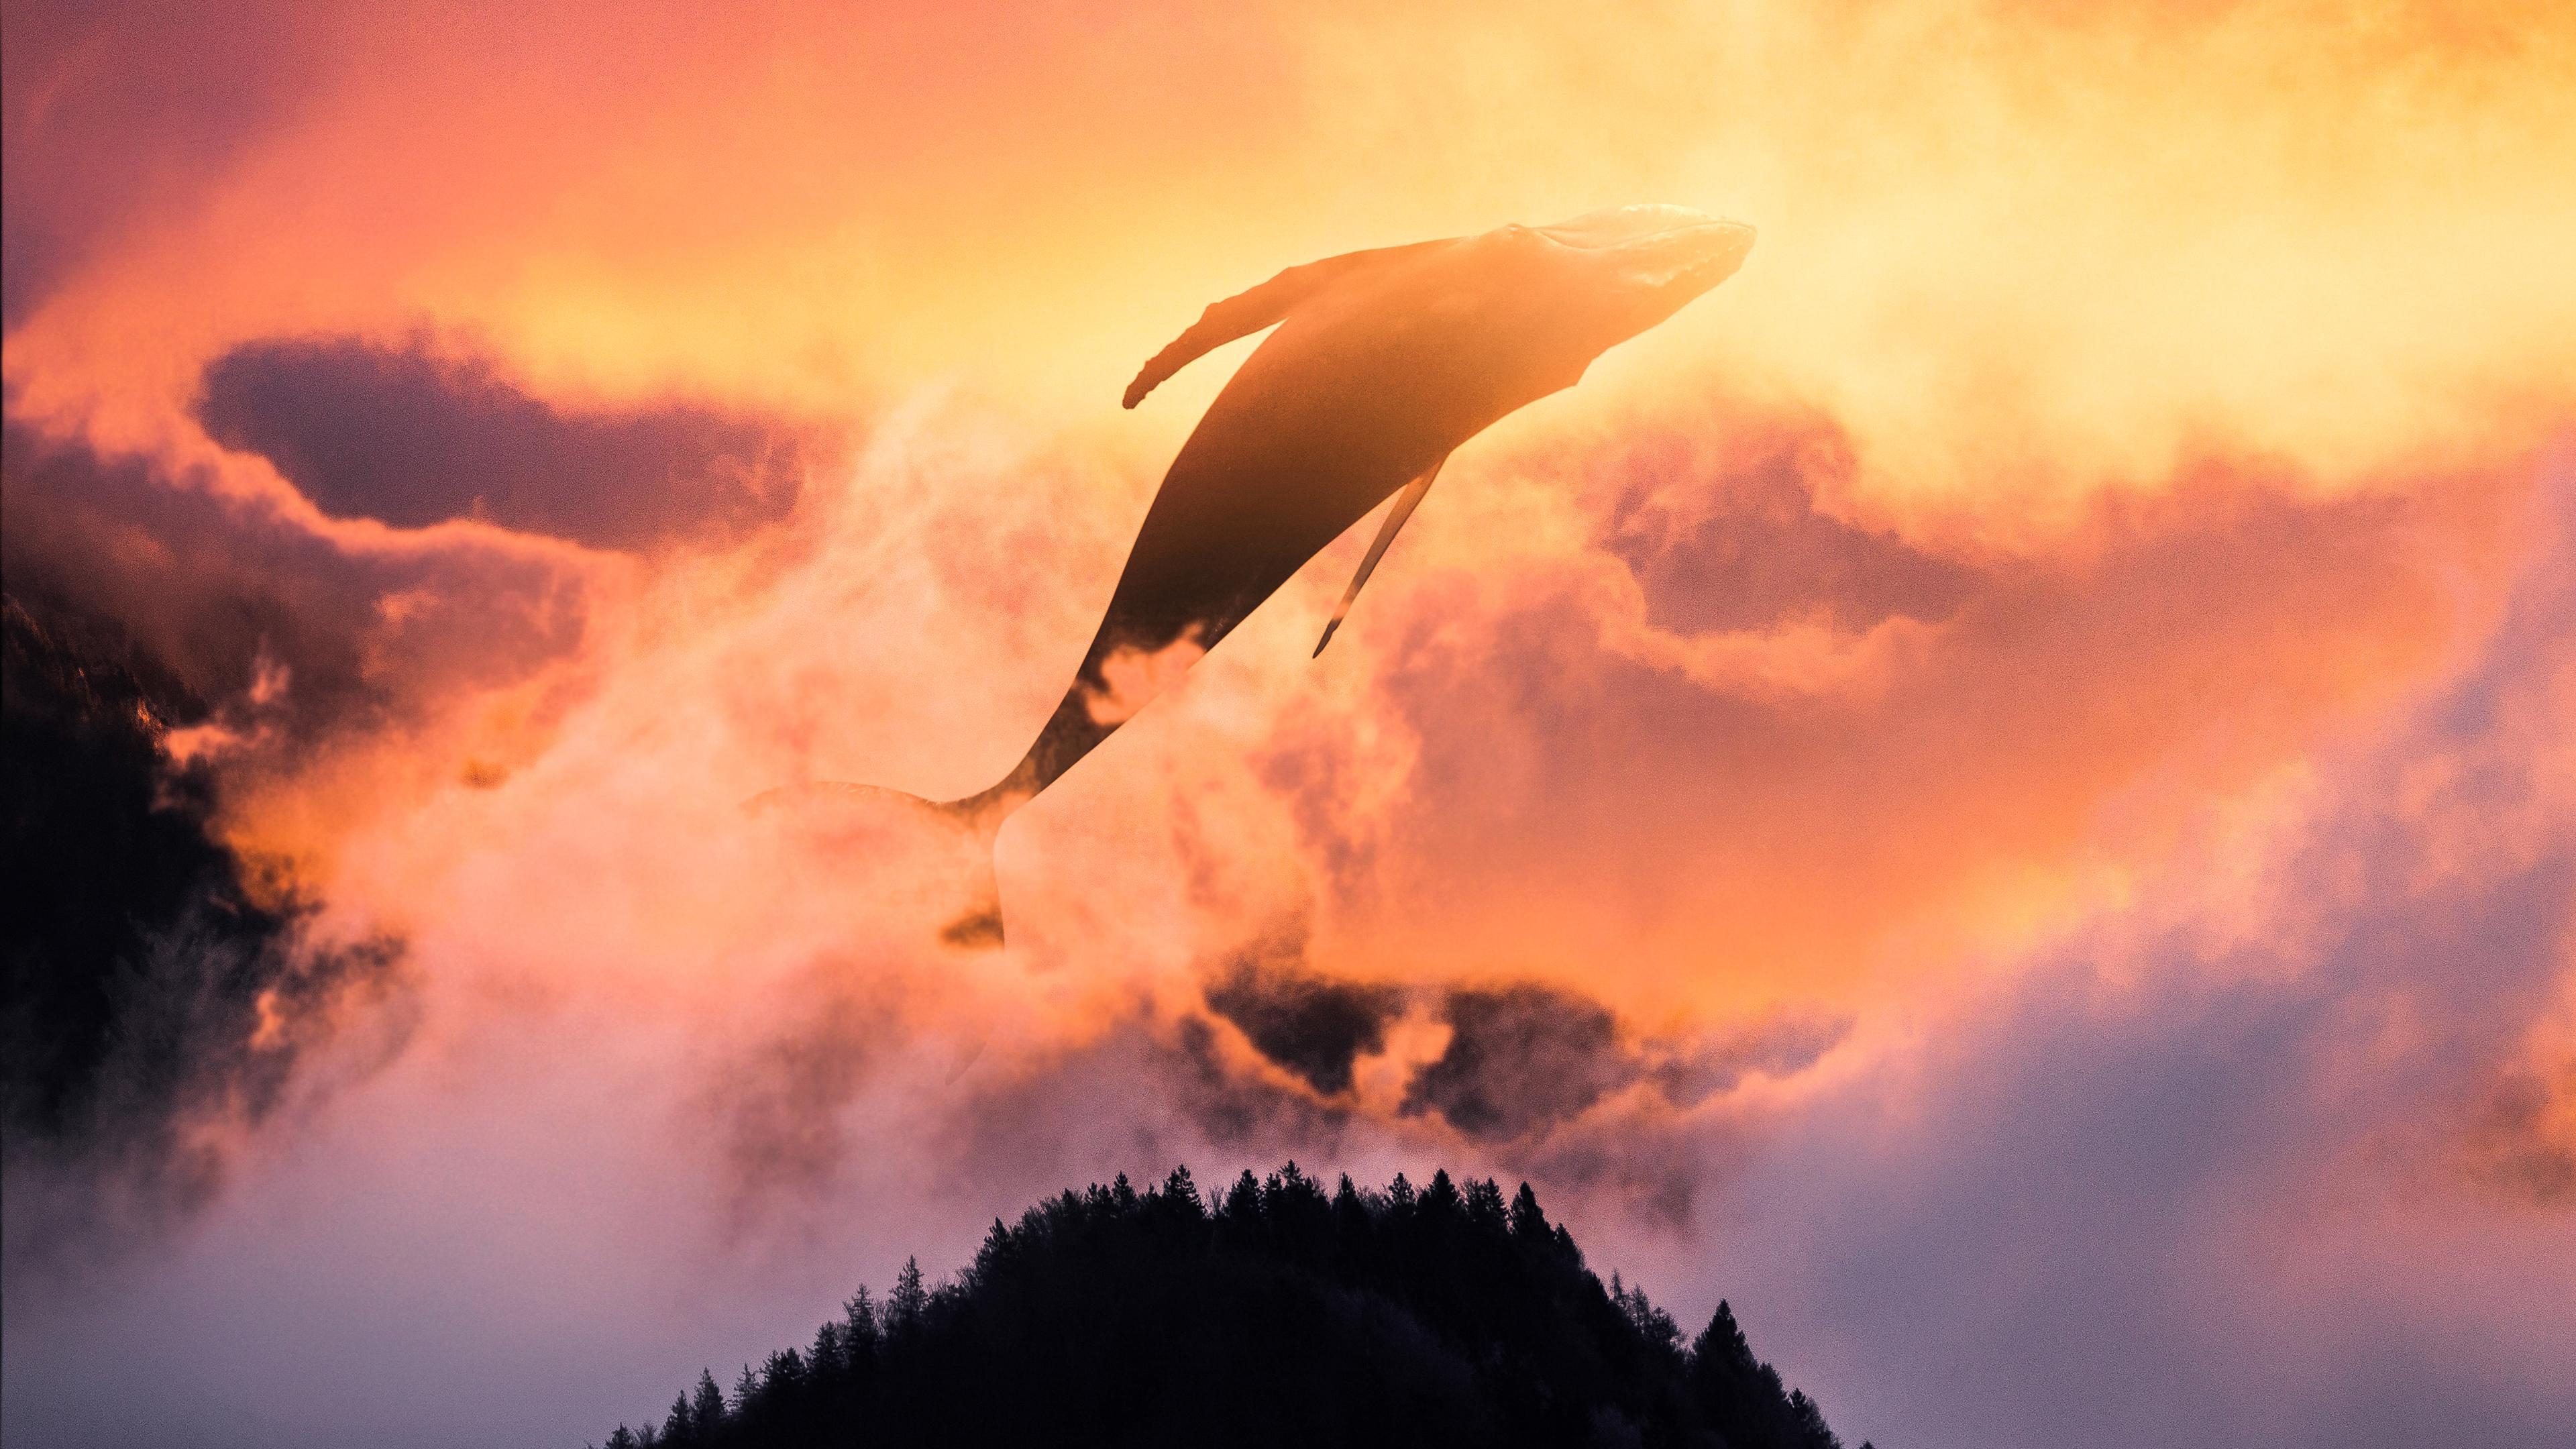 Surreal Sunset Whale 4K Wallpaper